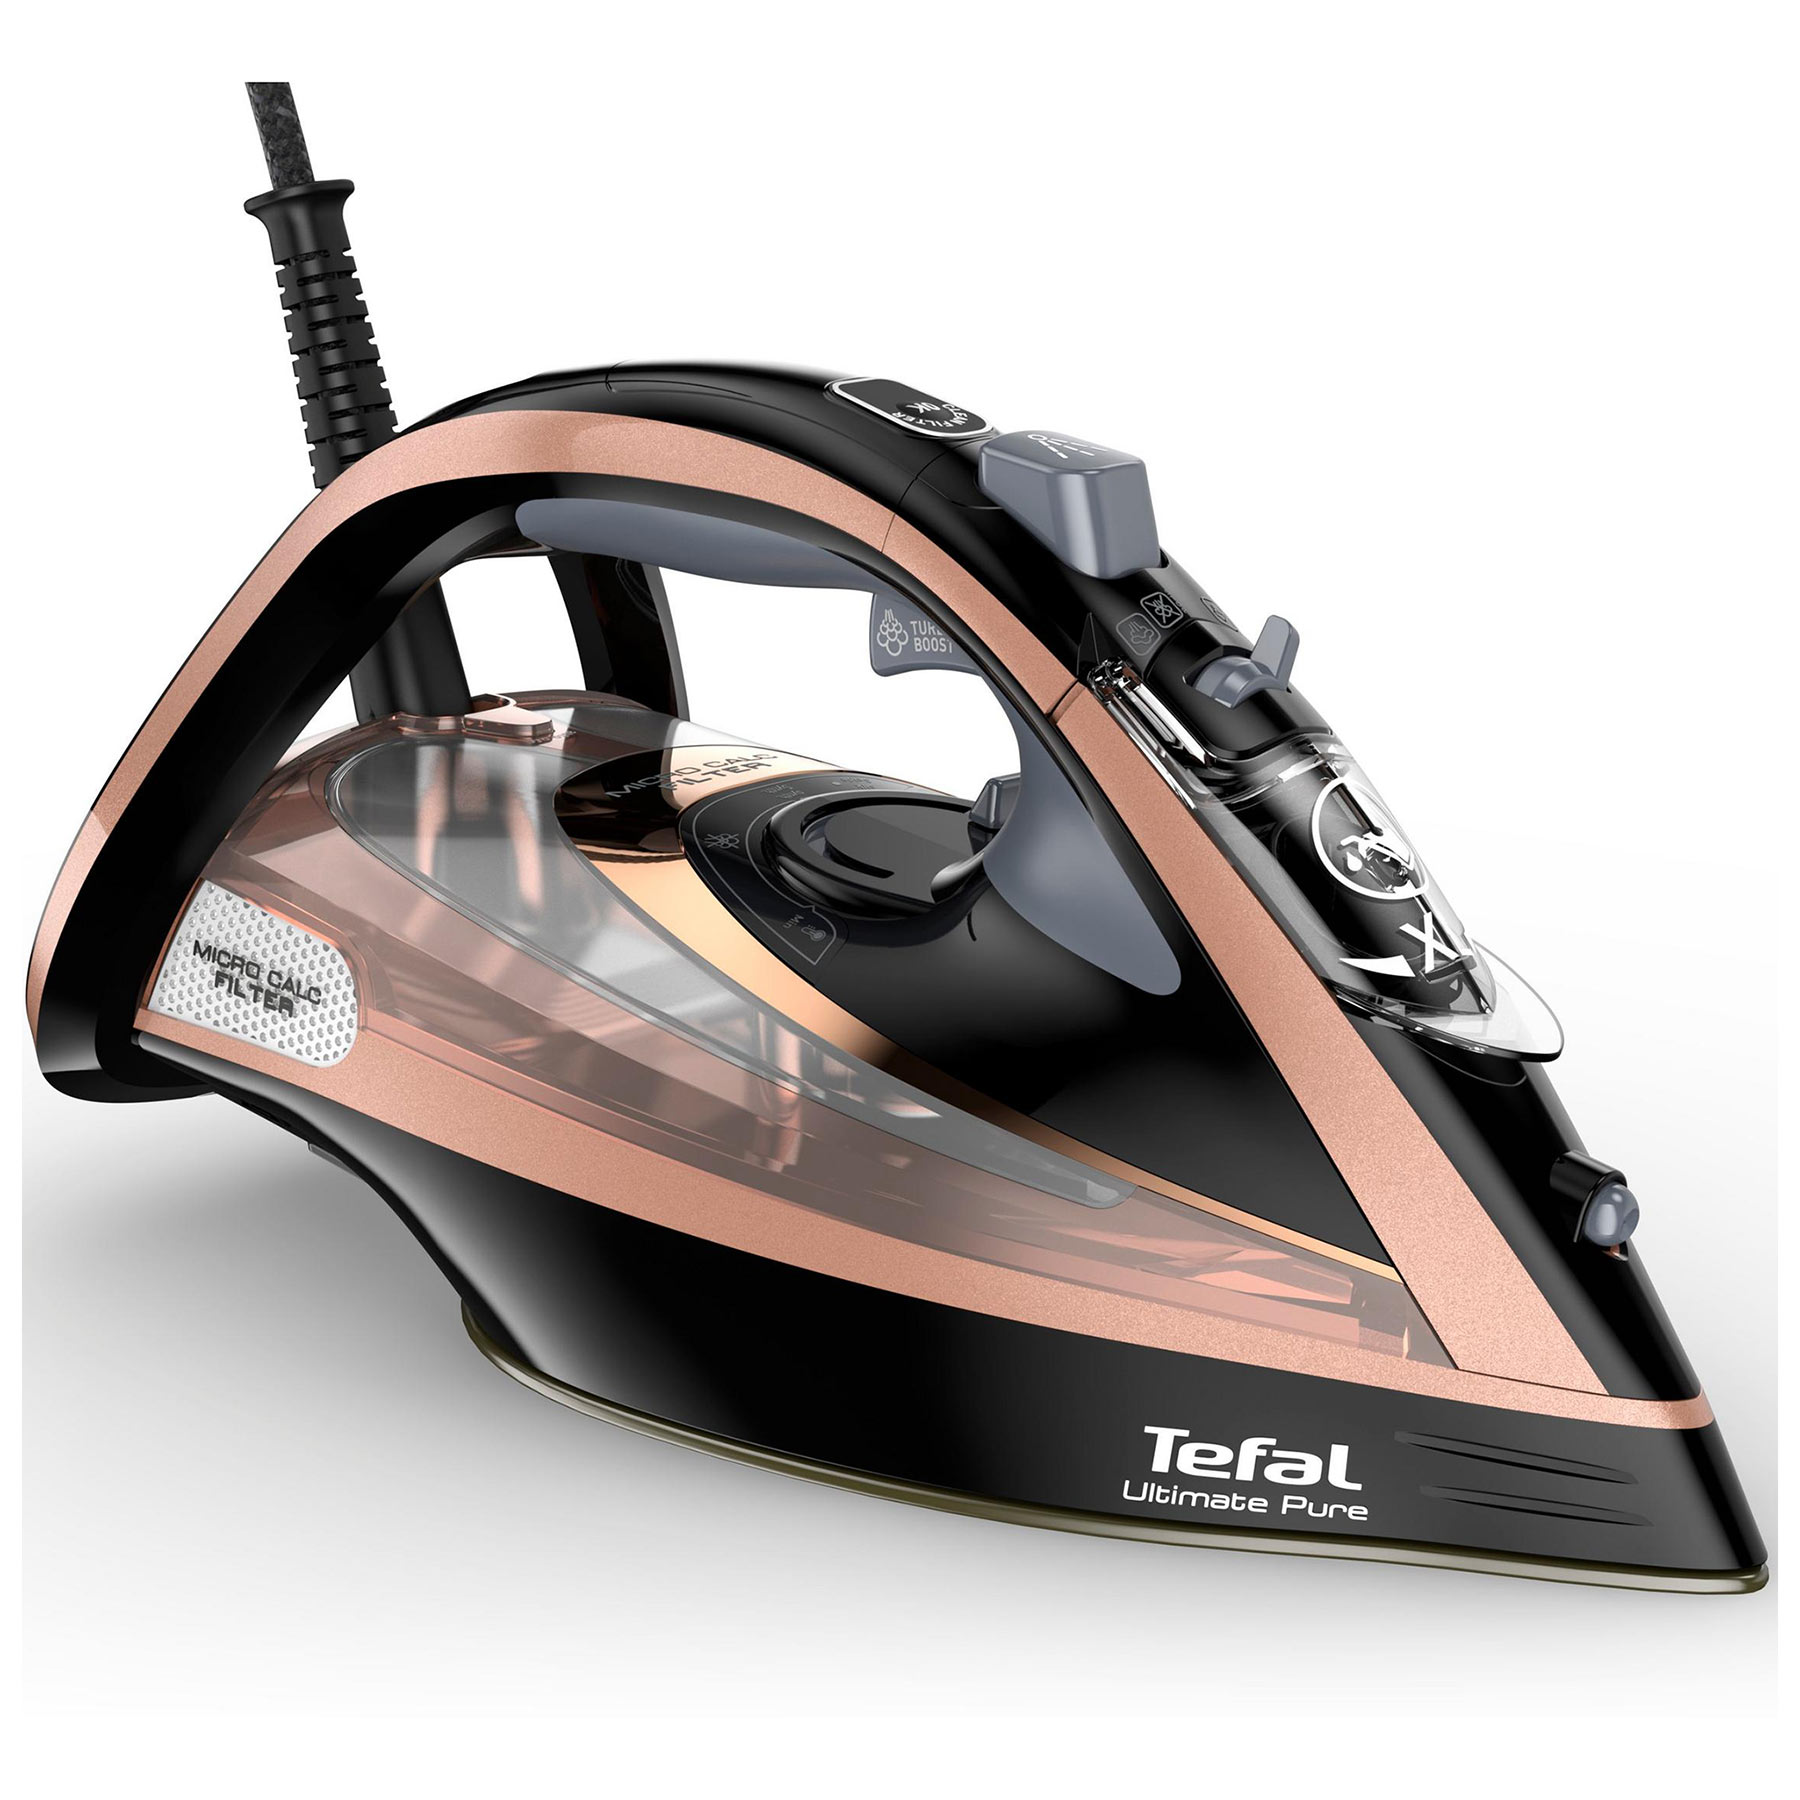 Tefal FV9845G0 Ultimate Pure Steam Iron in Black Rose Gold 3100W